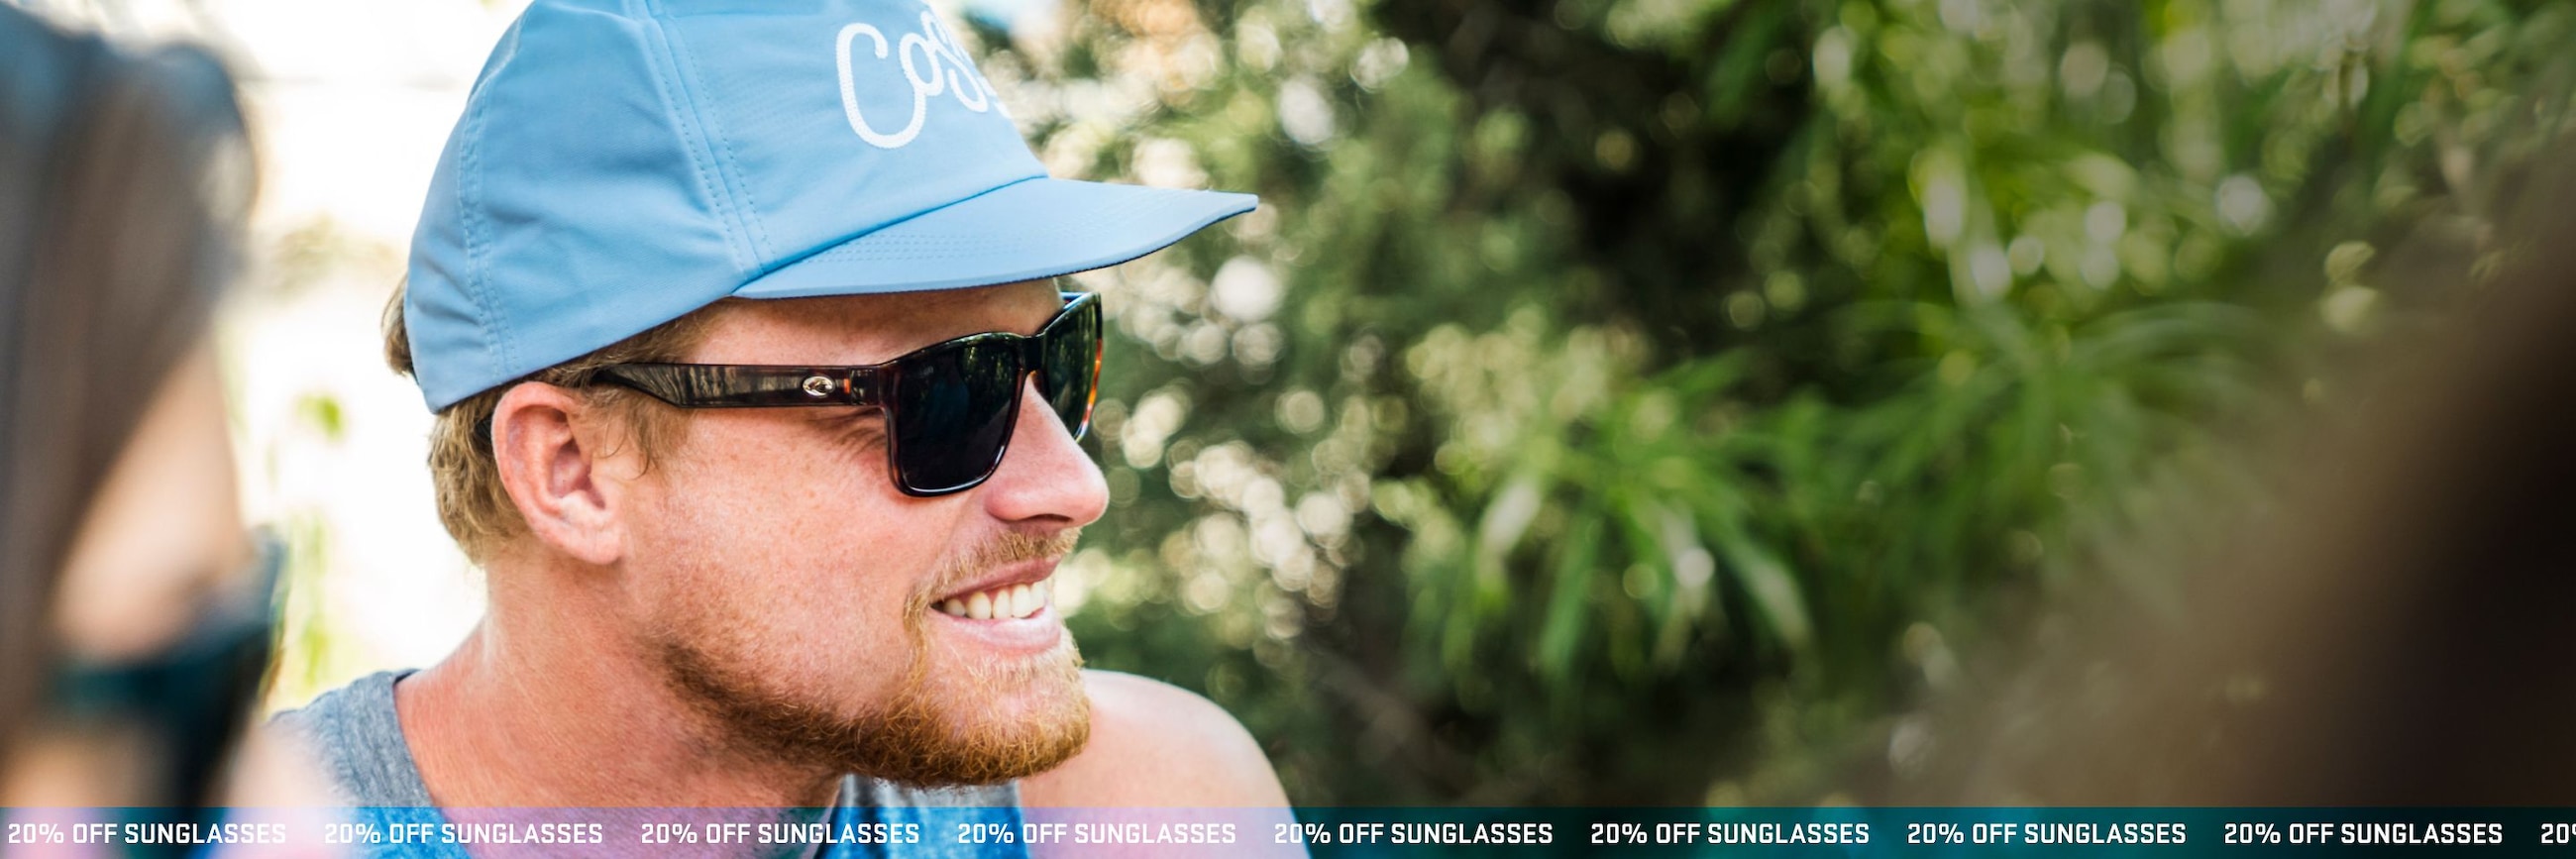 GET READY FOR SUMMER-Be at your best when you're on the water. Get summer-ready with 20% OFF select sunglasses.